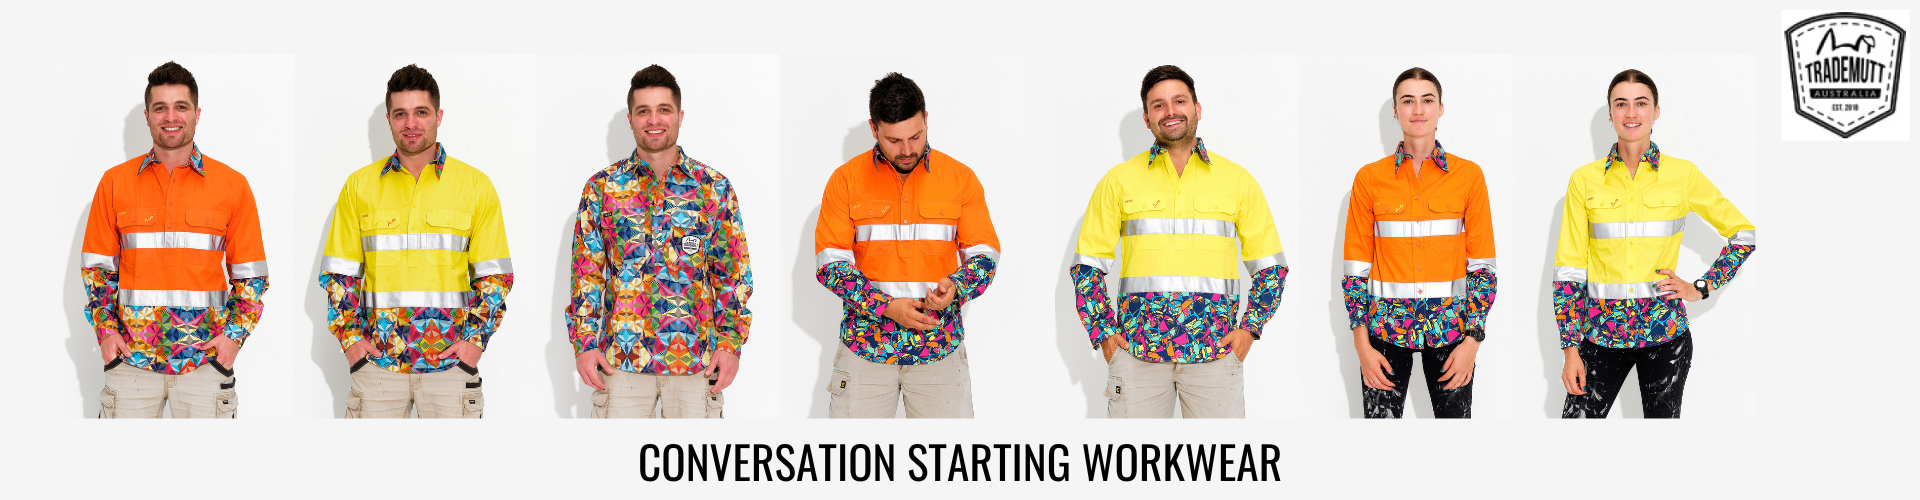 TradeMutt - Workwear that makes a difference